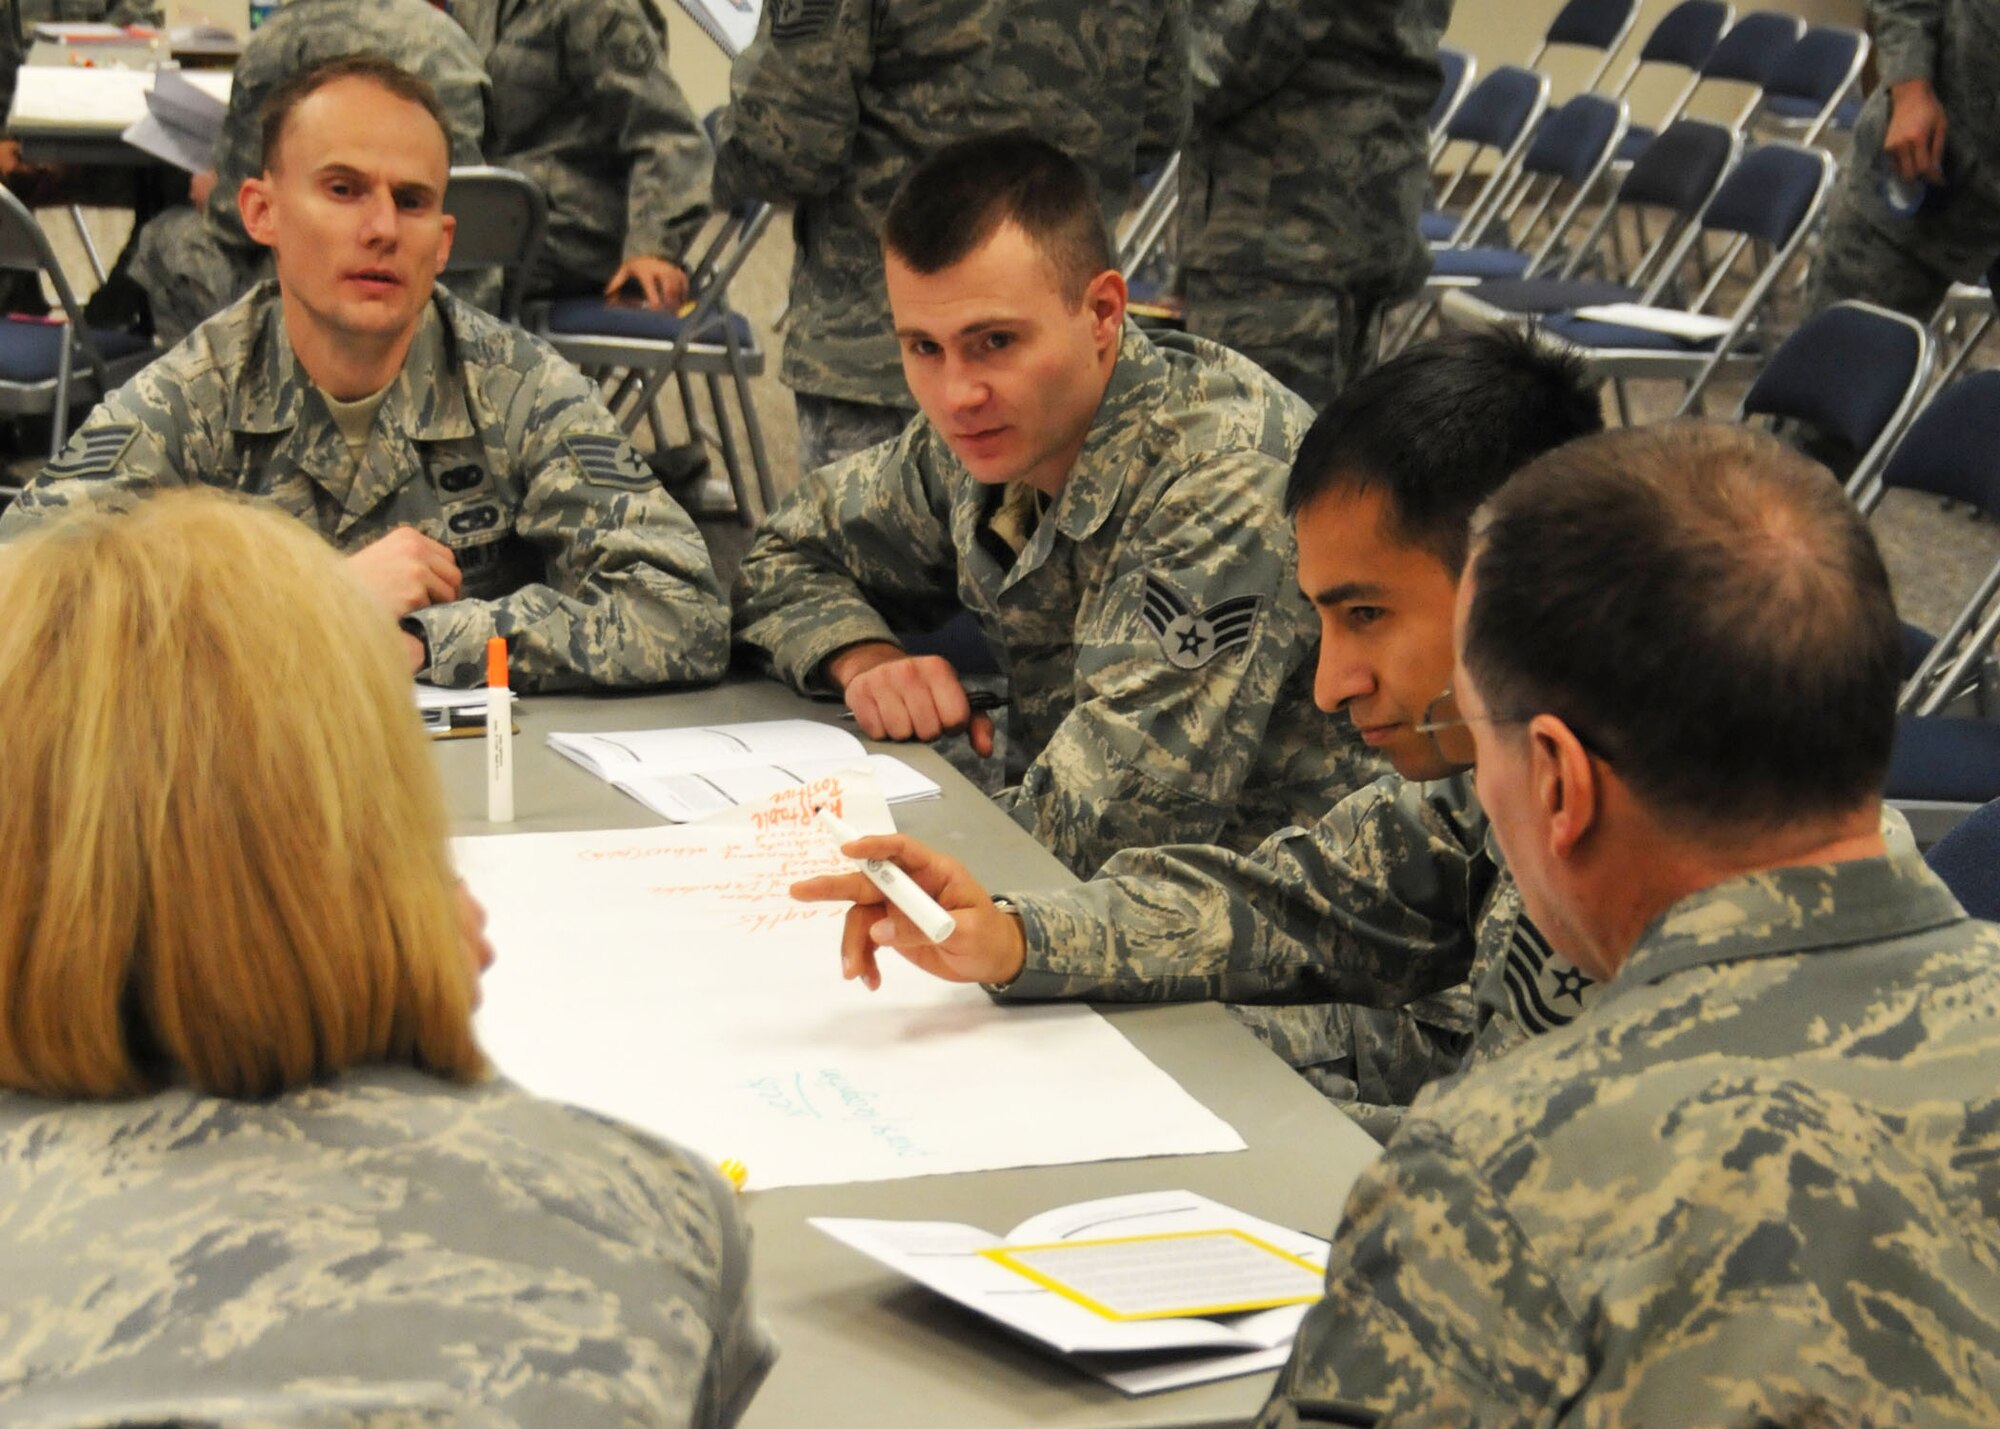 Enlisted members of the Montana Air National Guard participate in
the enlisted continuing process improvement event held at the 120th
Fighter Wing in Great Falls, Mont. on Nov. 2, 2013. National Guard
photo/Tech. Sgt. Christy Mason.